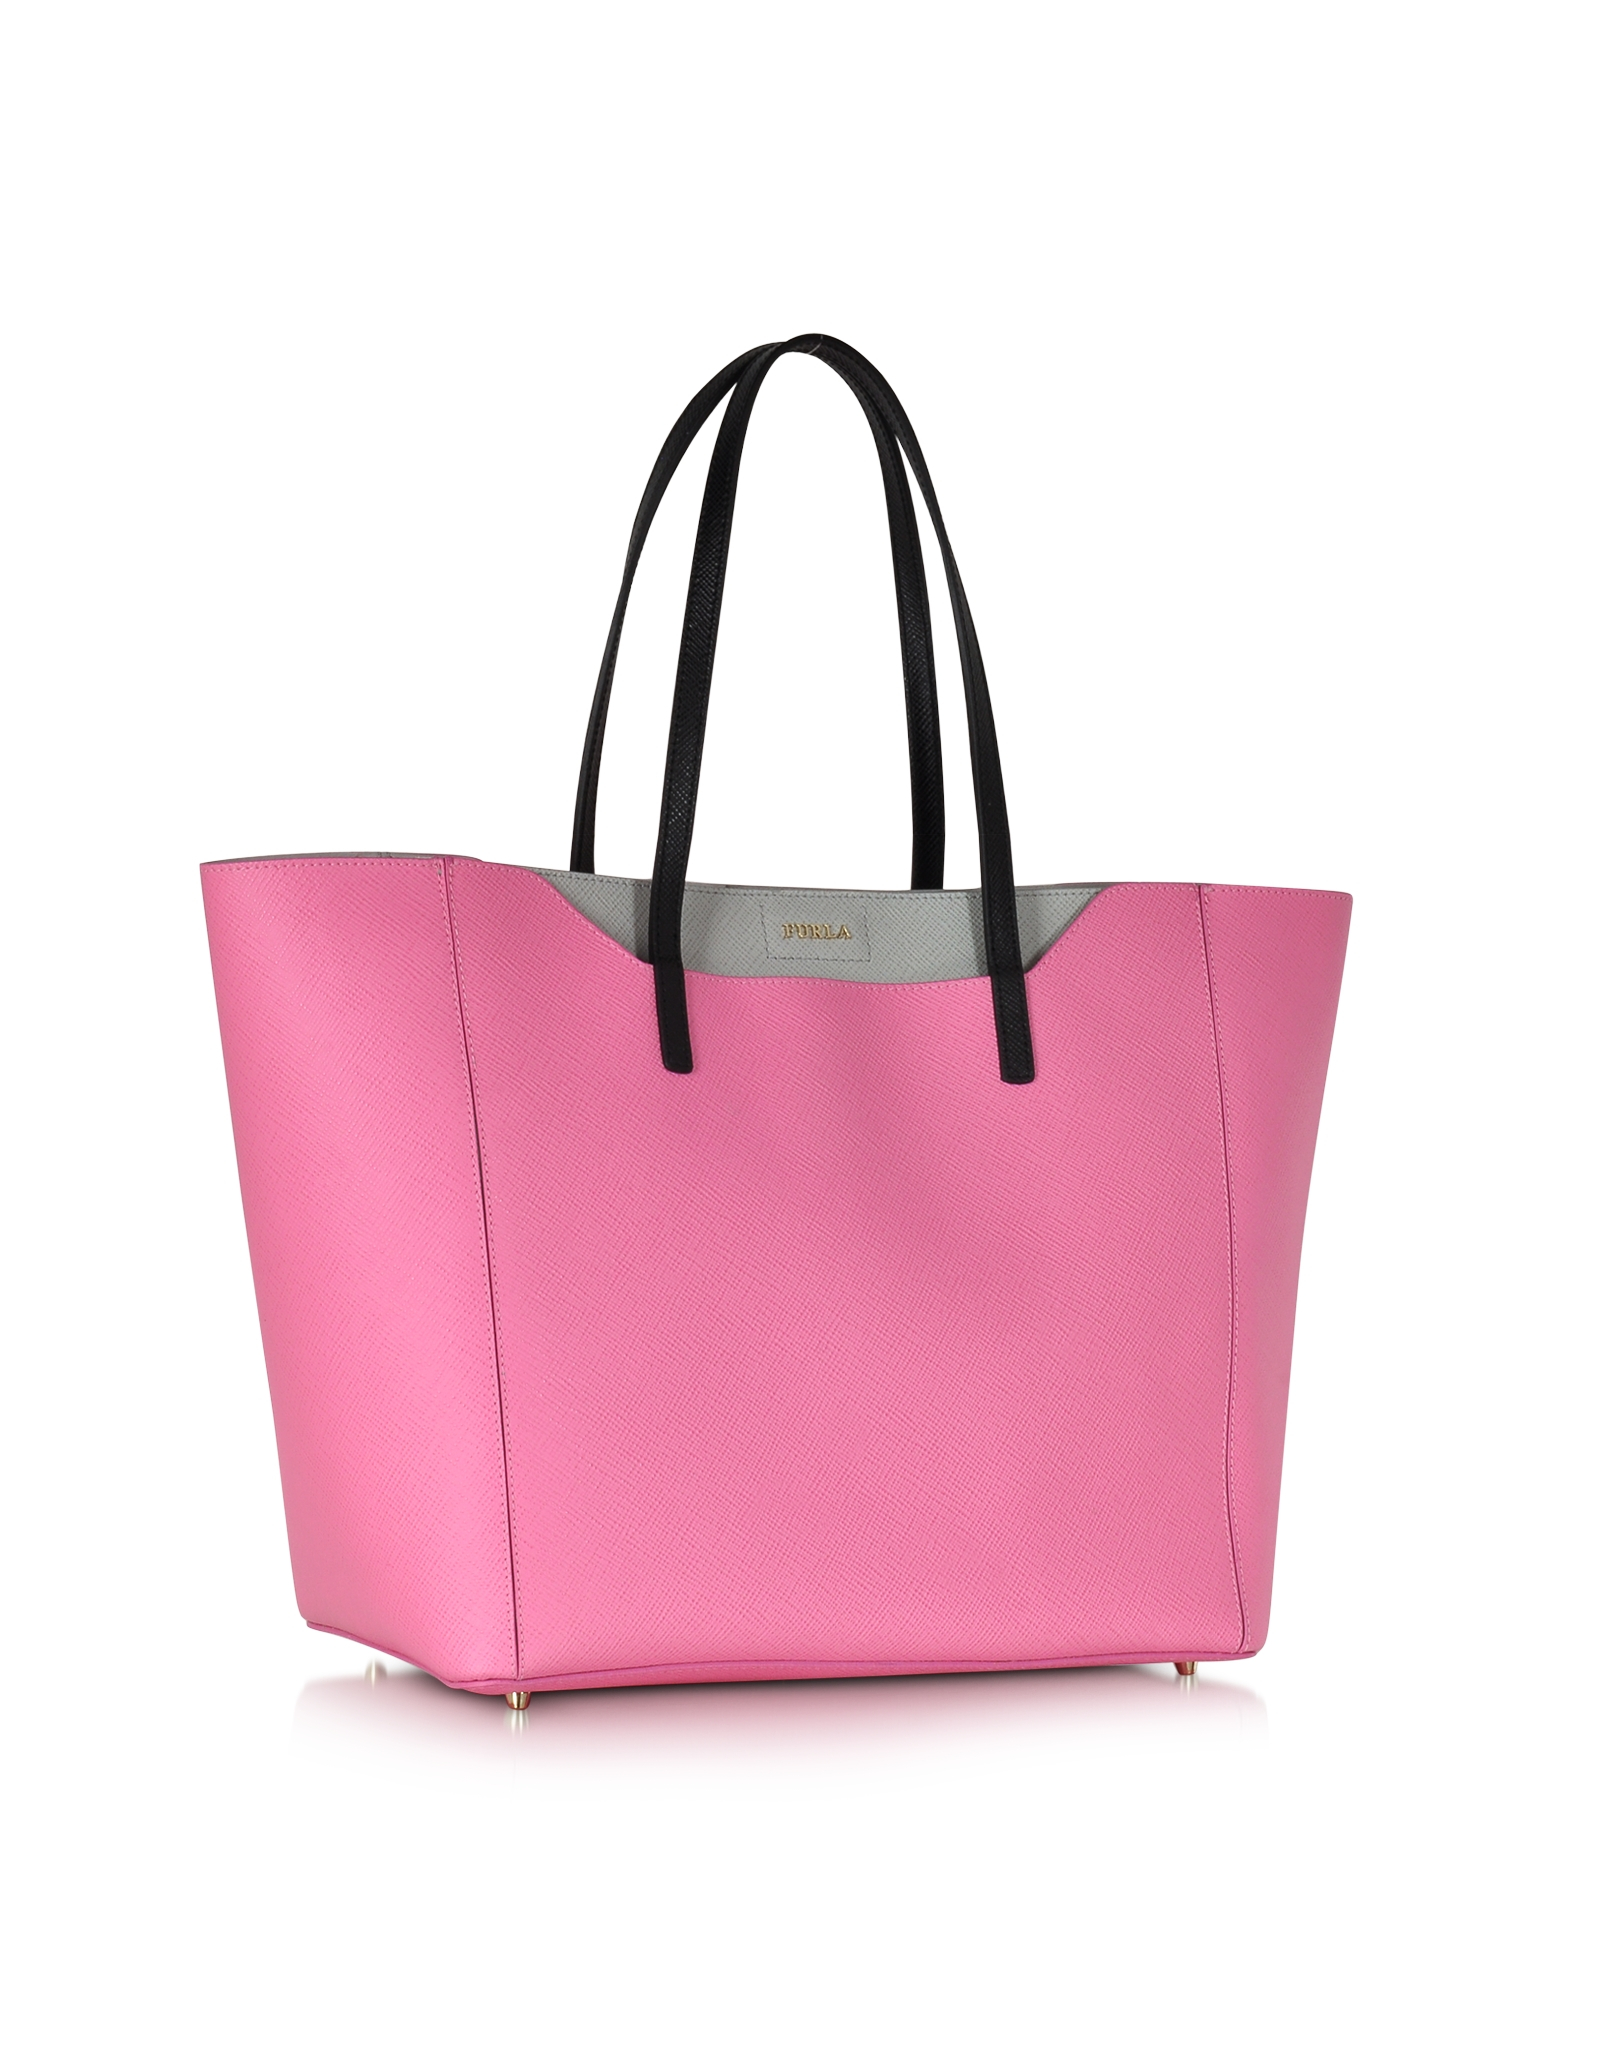 Lyst - Furla Fantasia Pink & Gray Leather Tote Bag in Pink